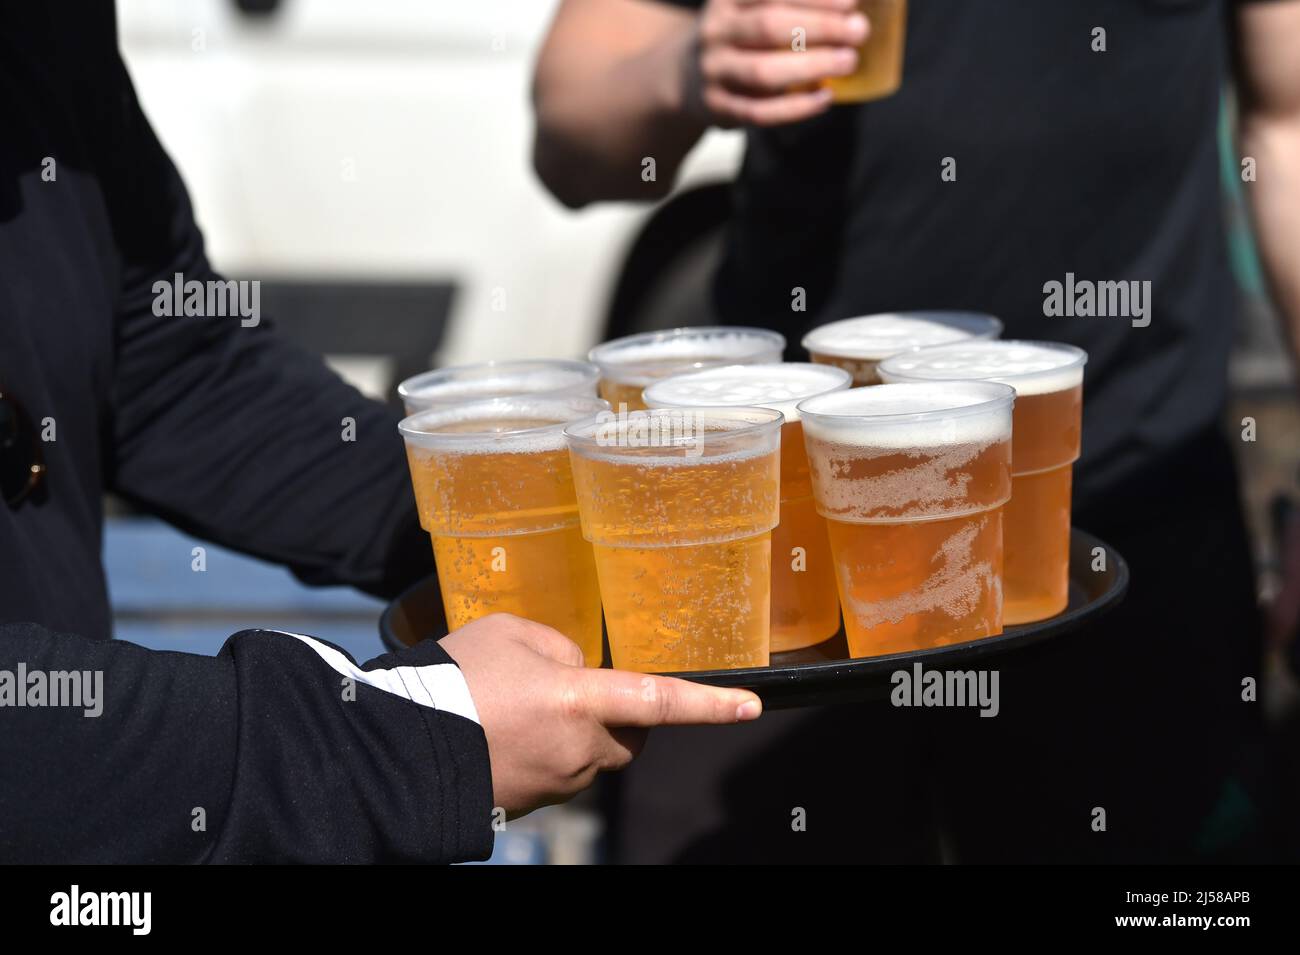 Man carrying a tray of lager beer UK Stock Photo